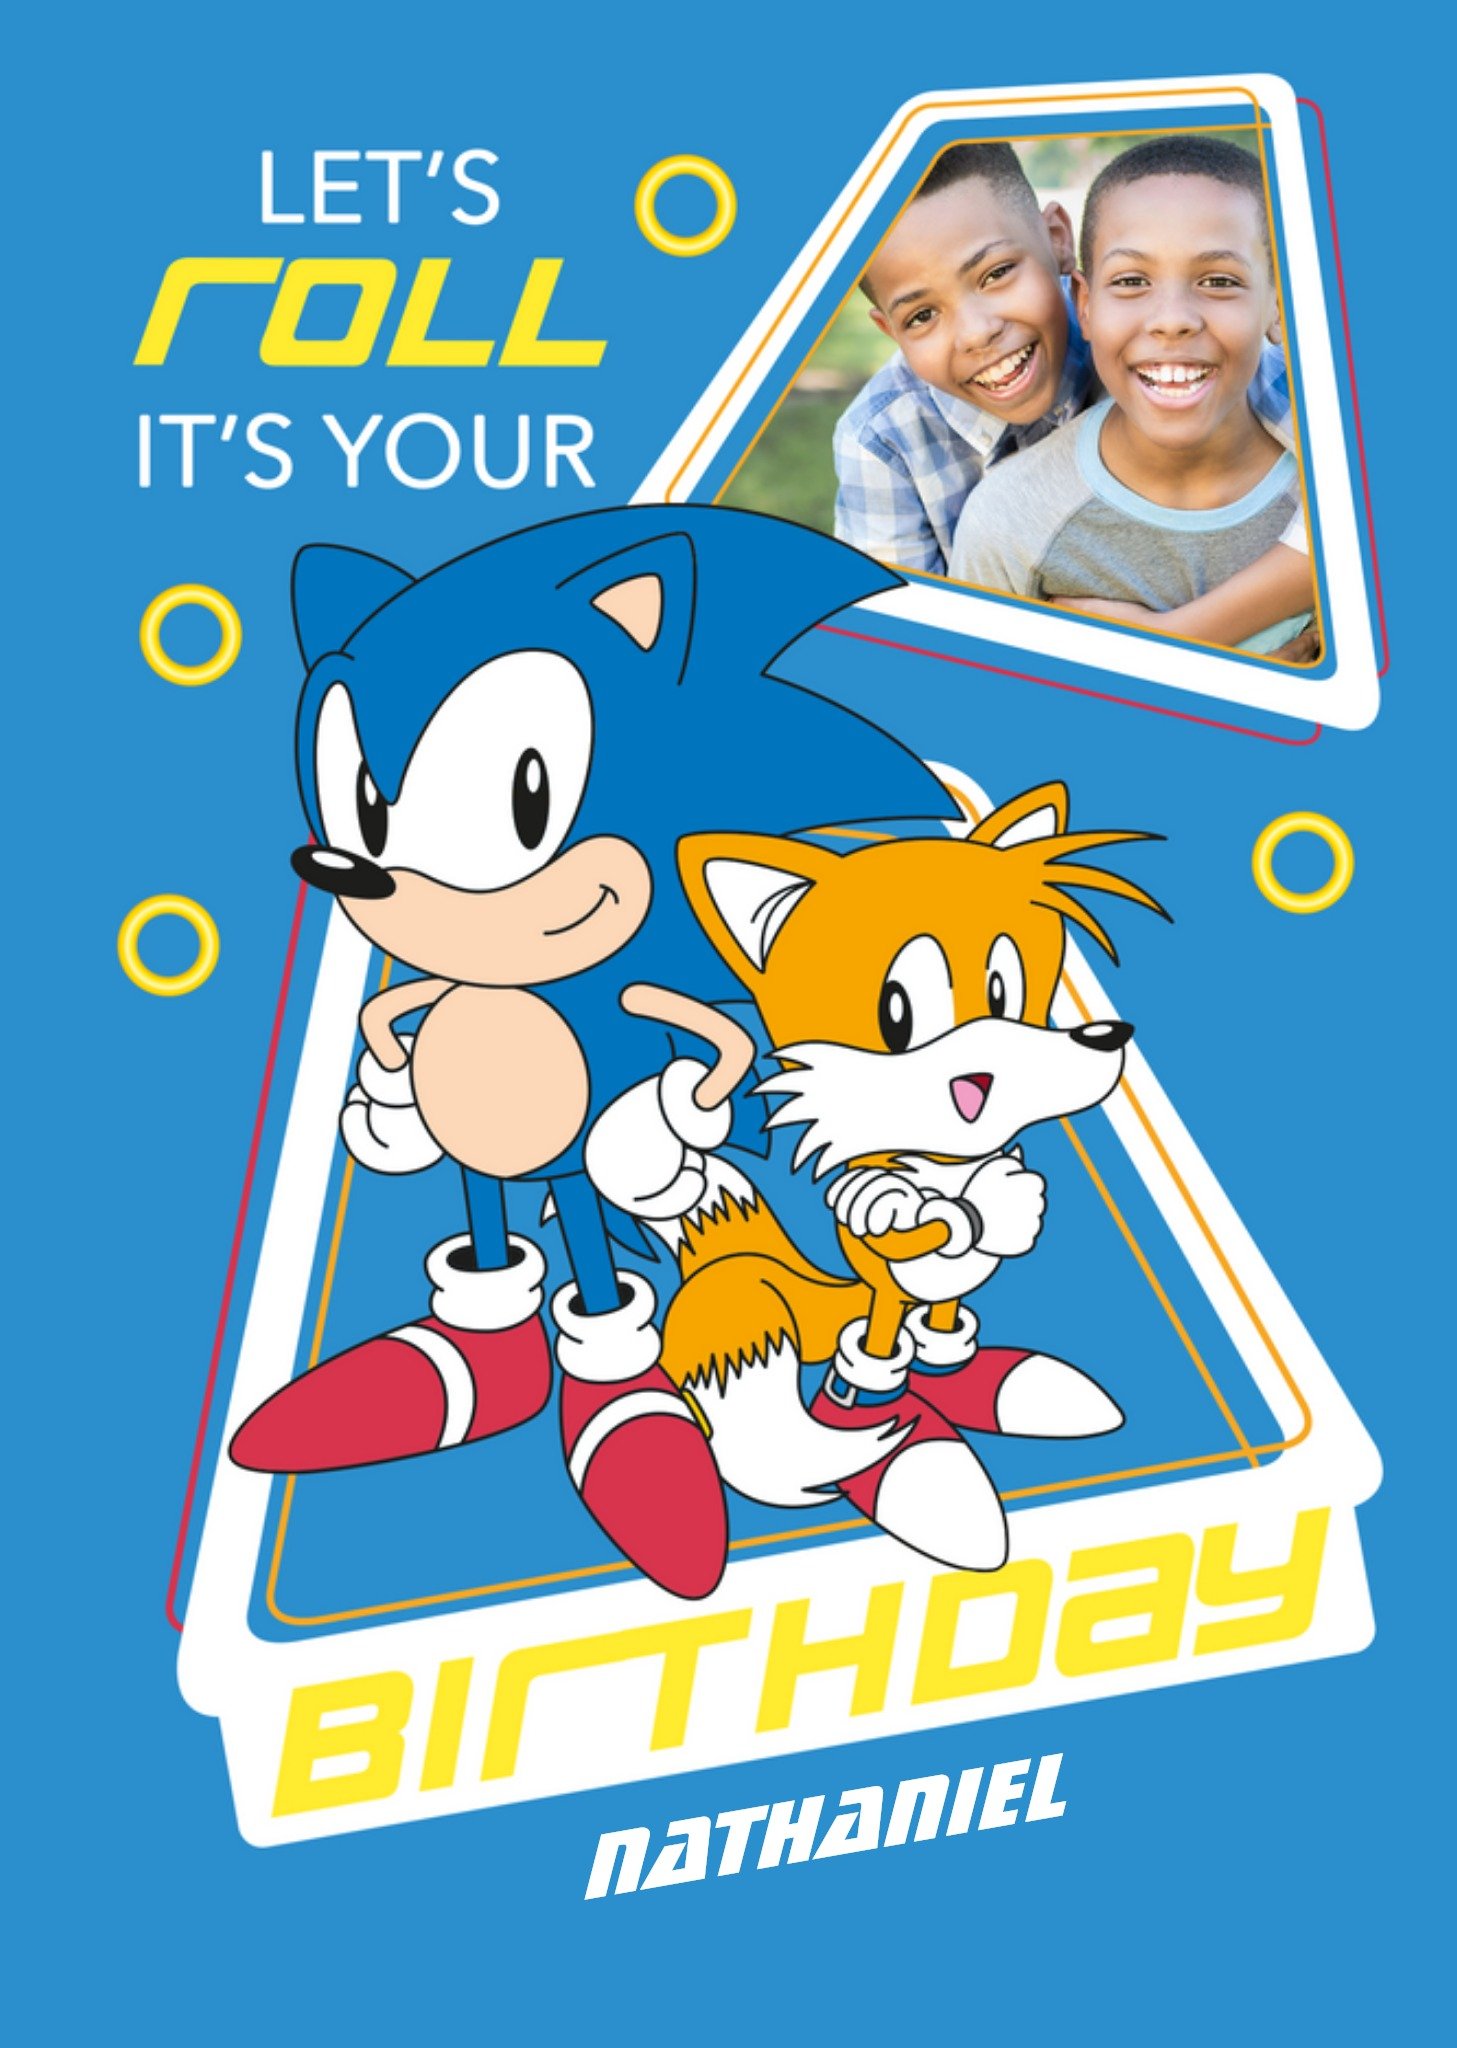 Sega Sonic Lets Roll Its Your Birthday Photo Upload Card, Large